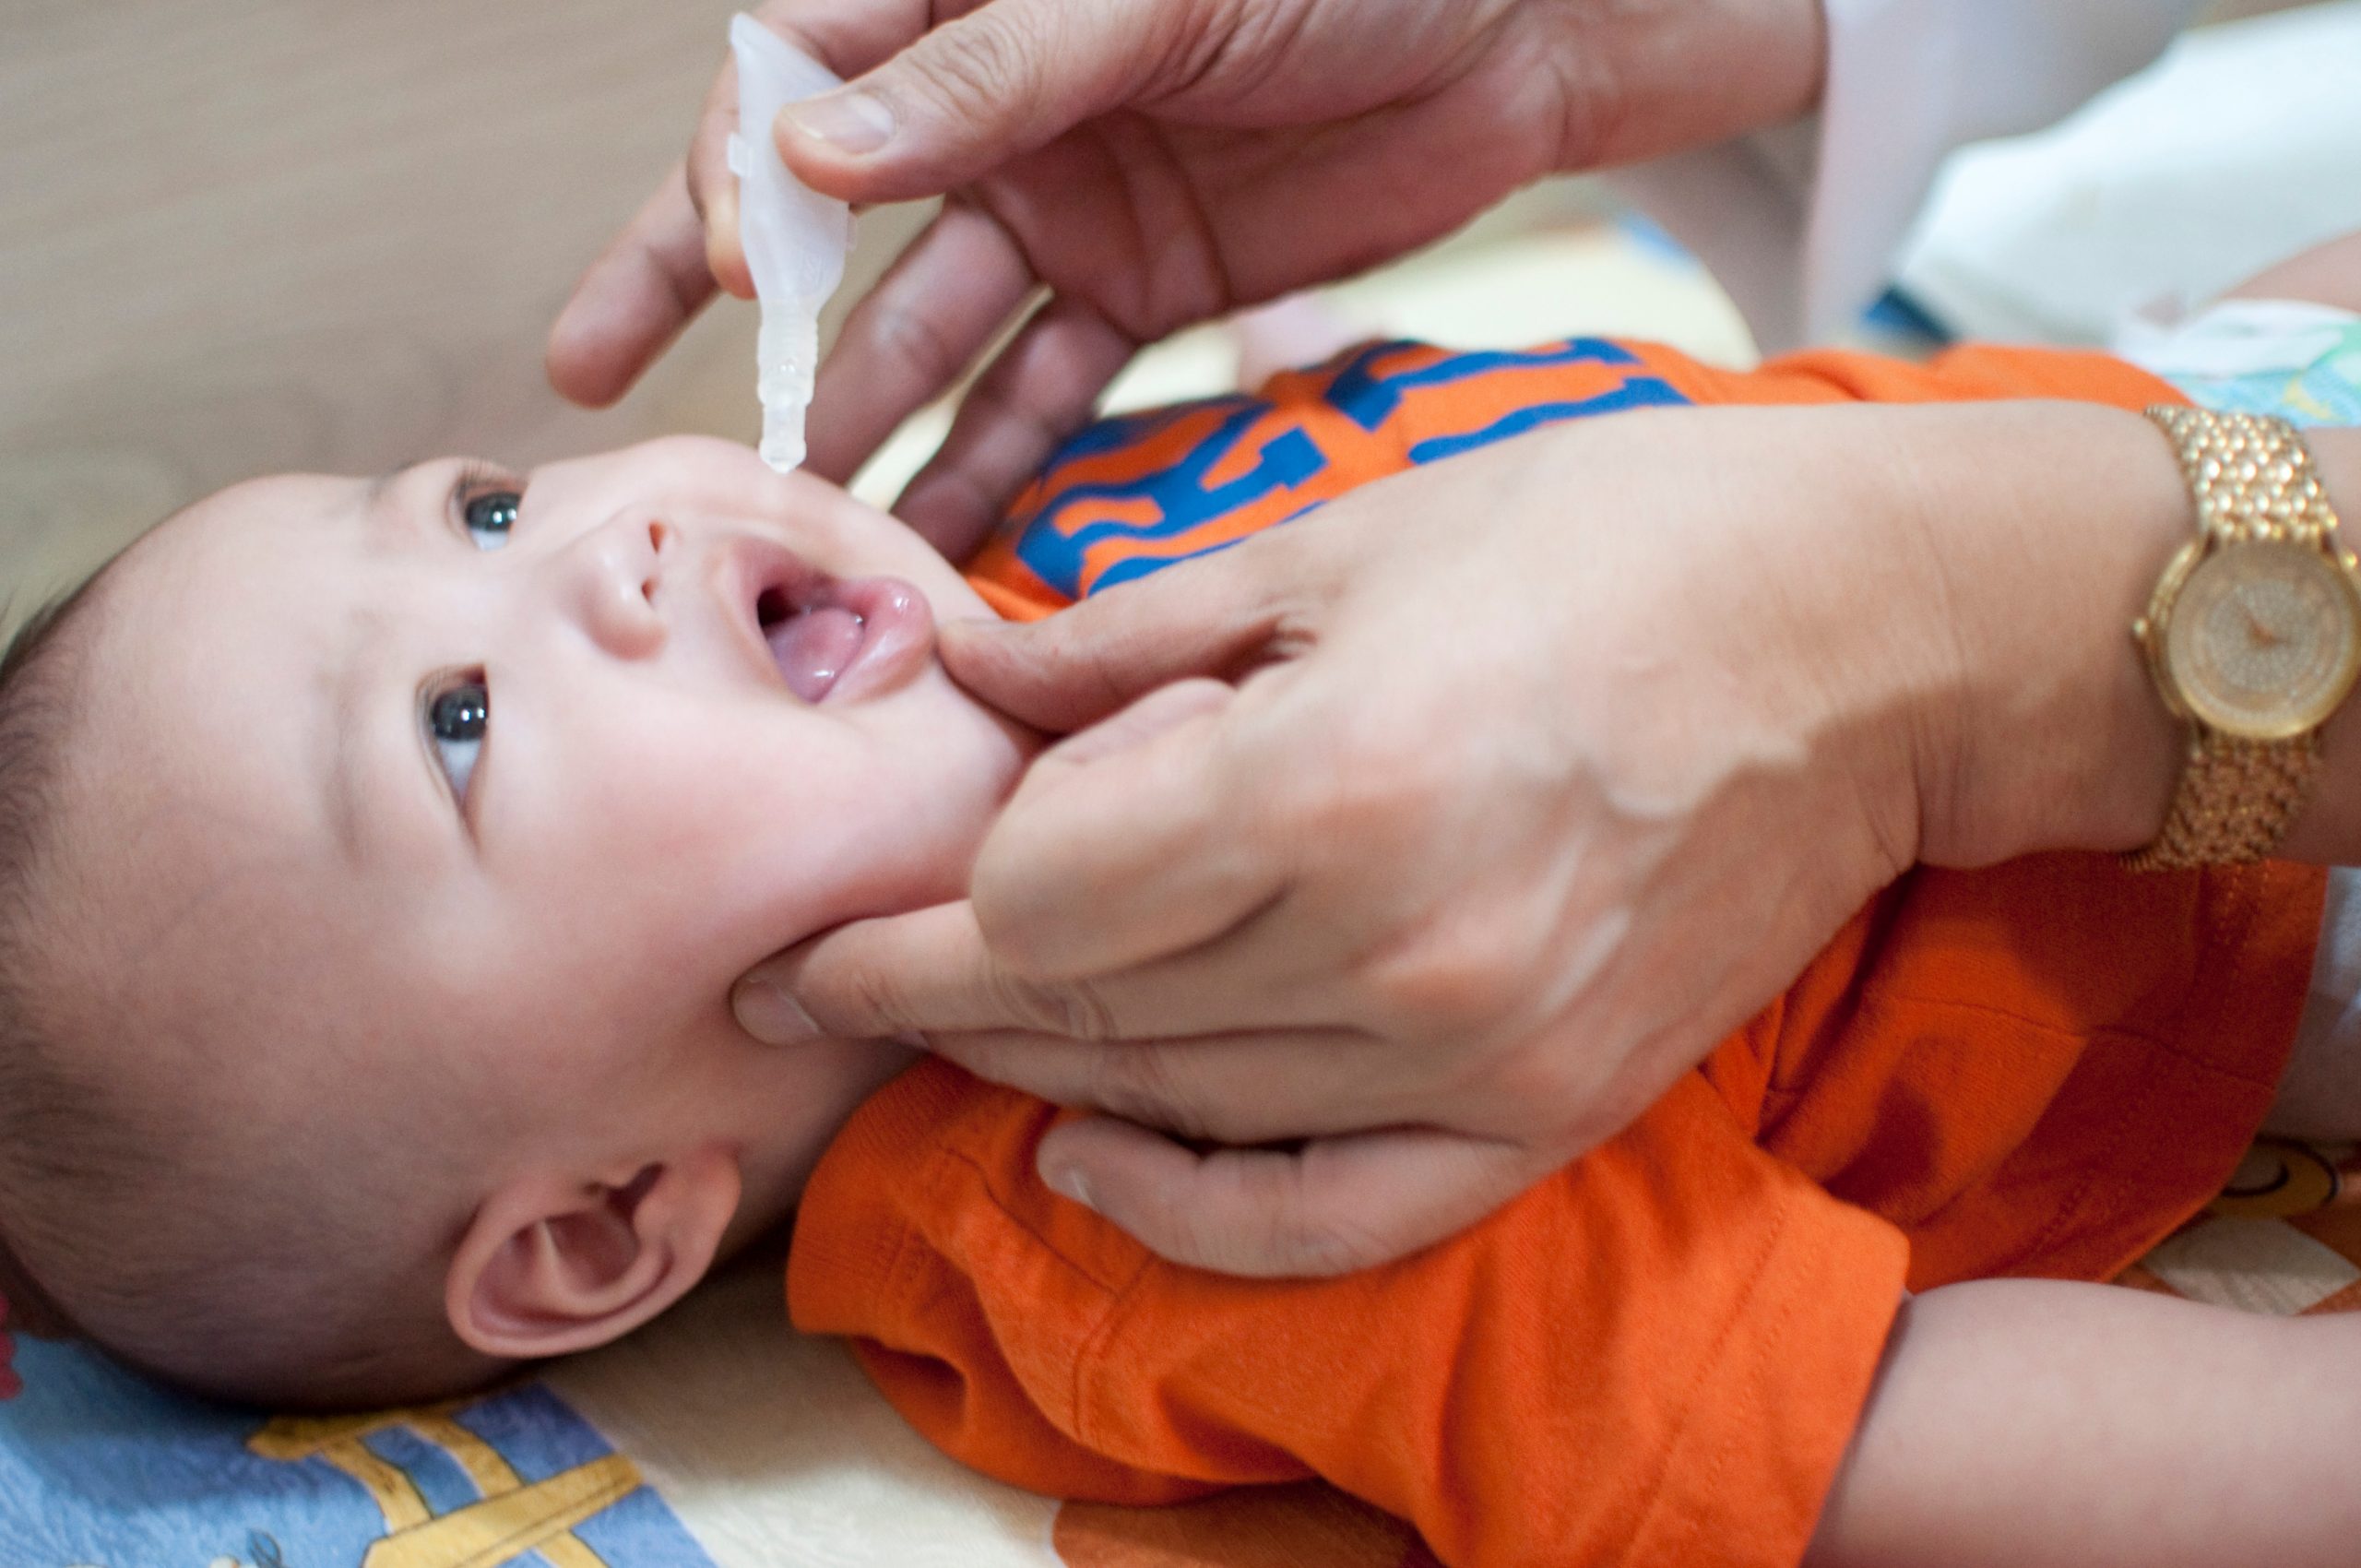 An infant receives an oral vaccination